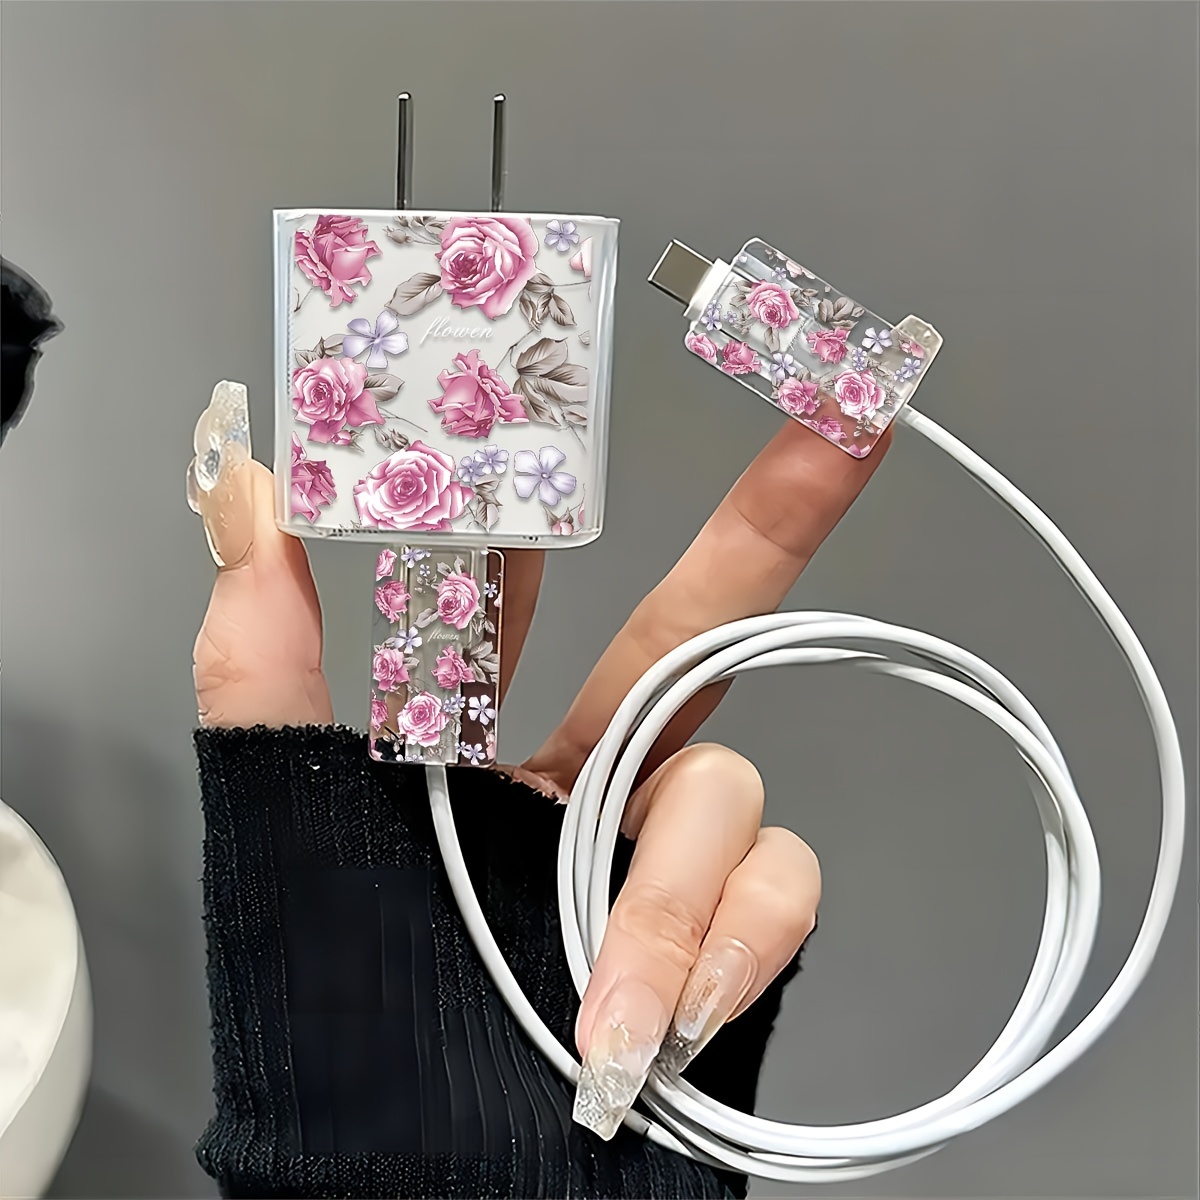 

3-piece Rose Pattern Transparent Charger Protector Set For Iphone 18w/20w, Includes Cable & Cord Covers - Perfect Gift